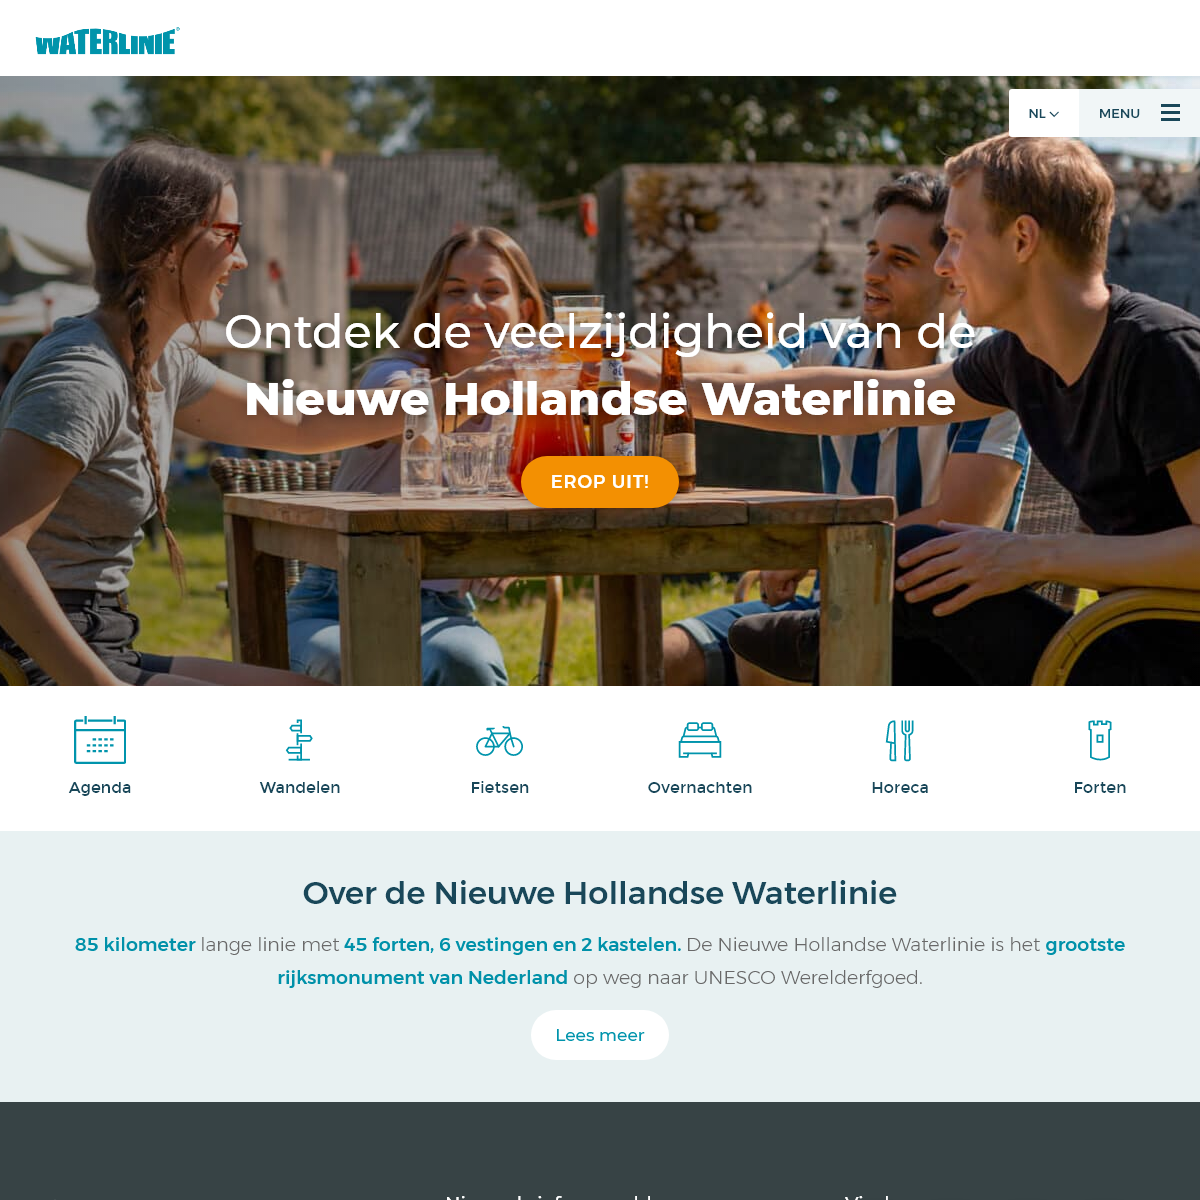 A complete backup of hollandsewaterlinie.nl